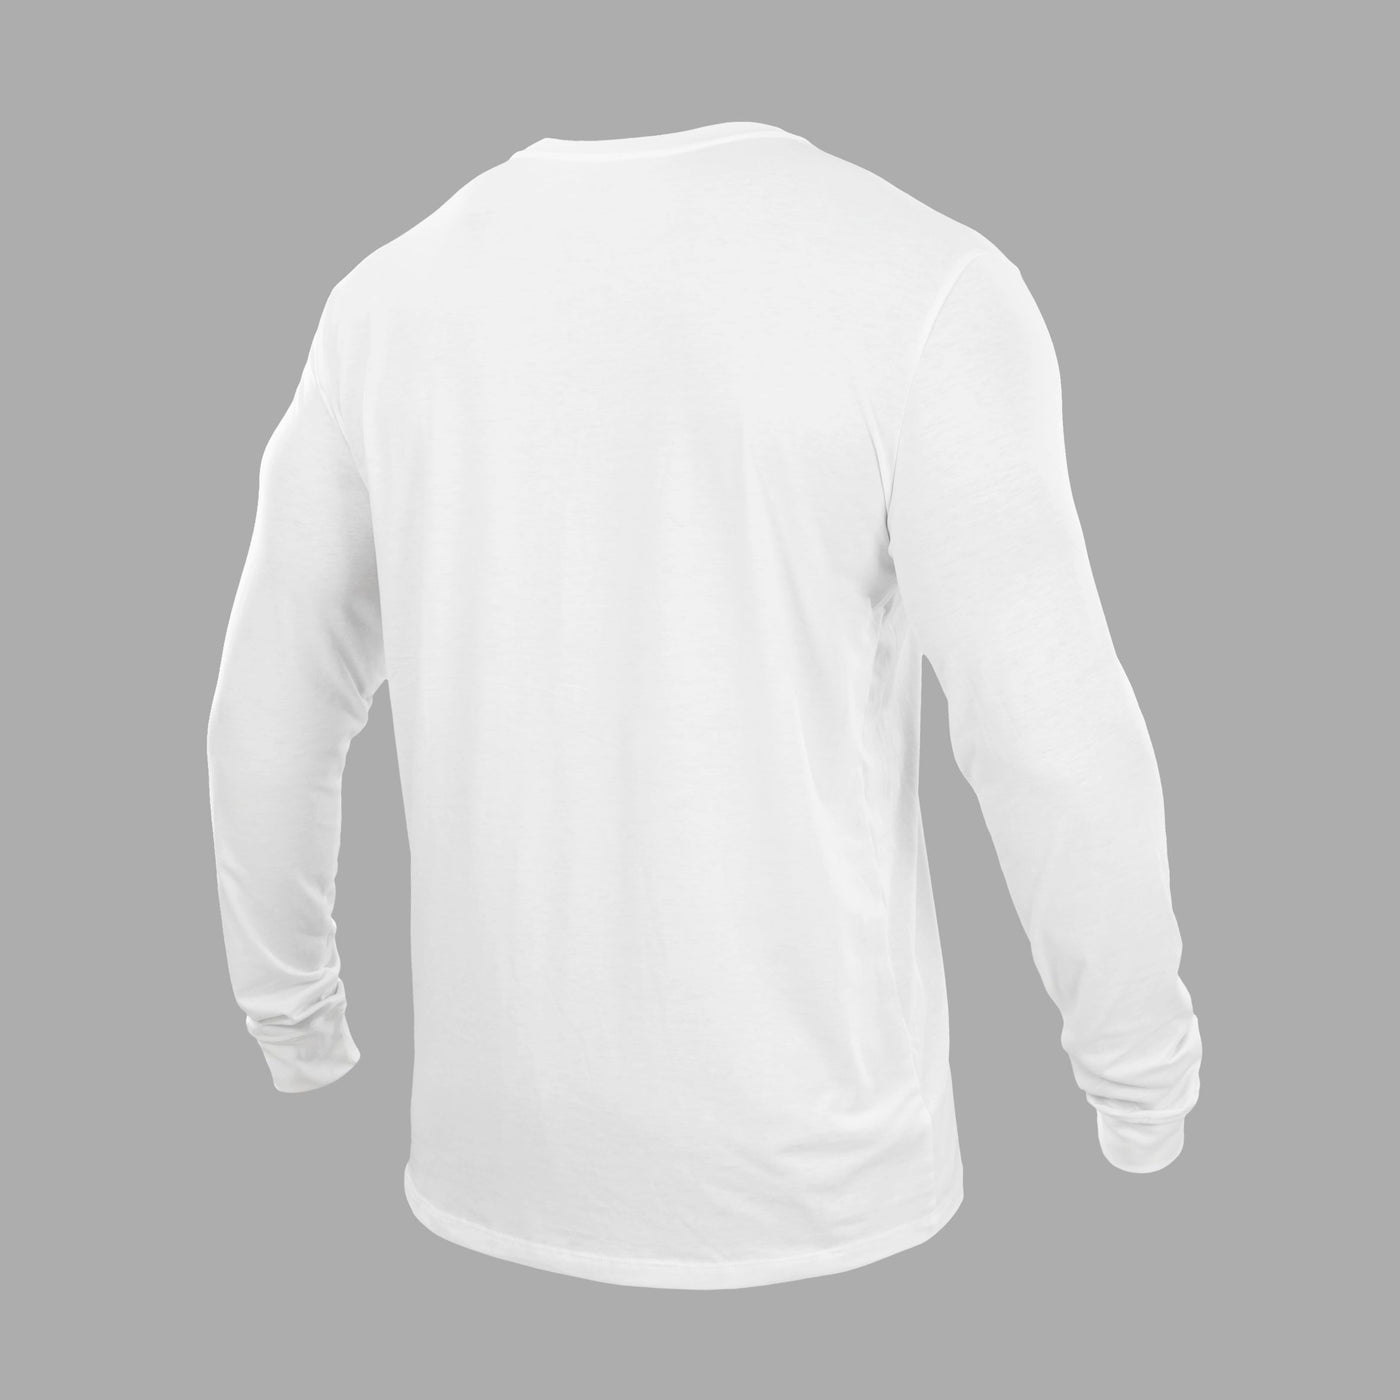 Basic White Dry Fit Cotton/Poly Long Sleeve Tee - Big